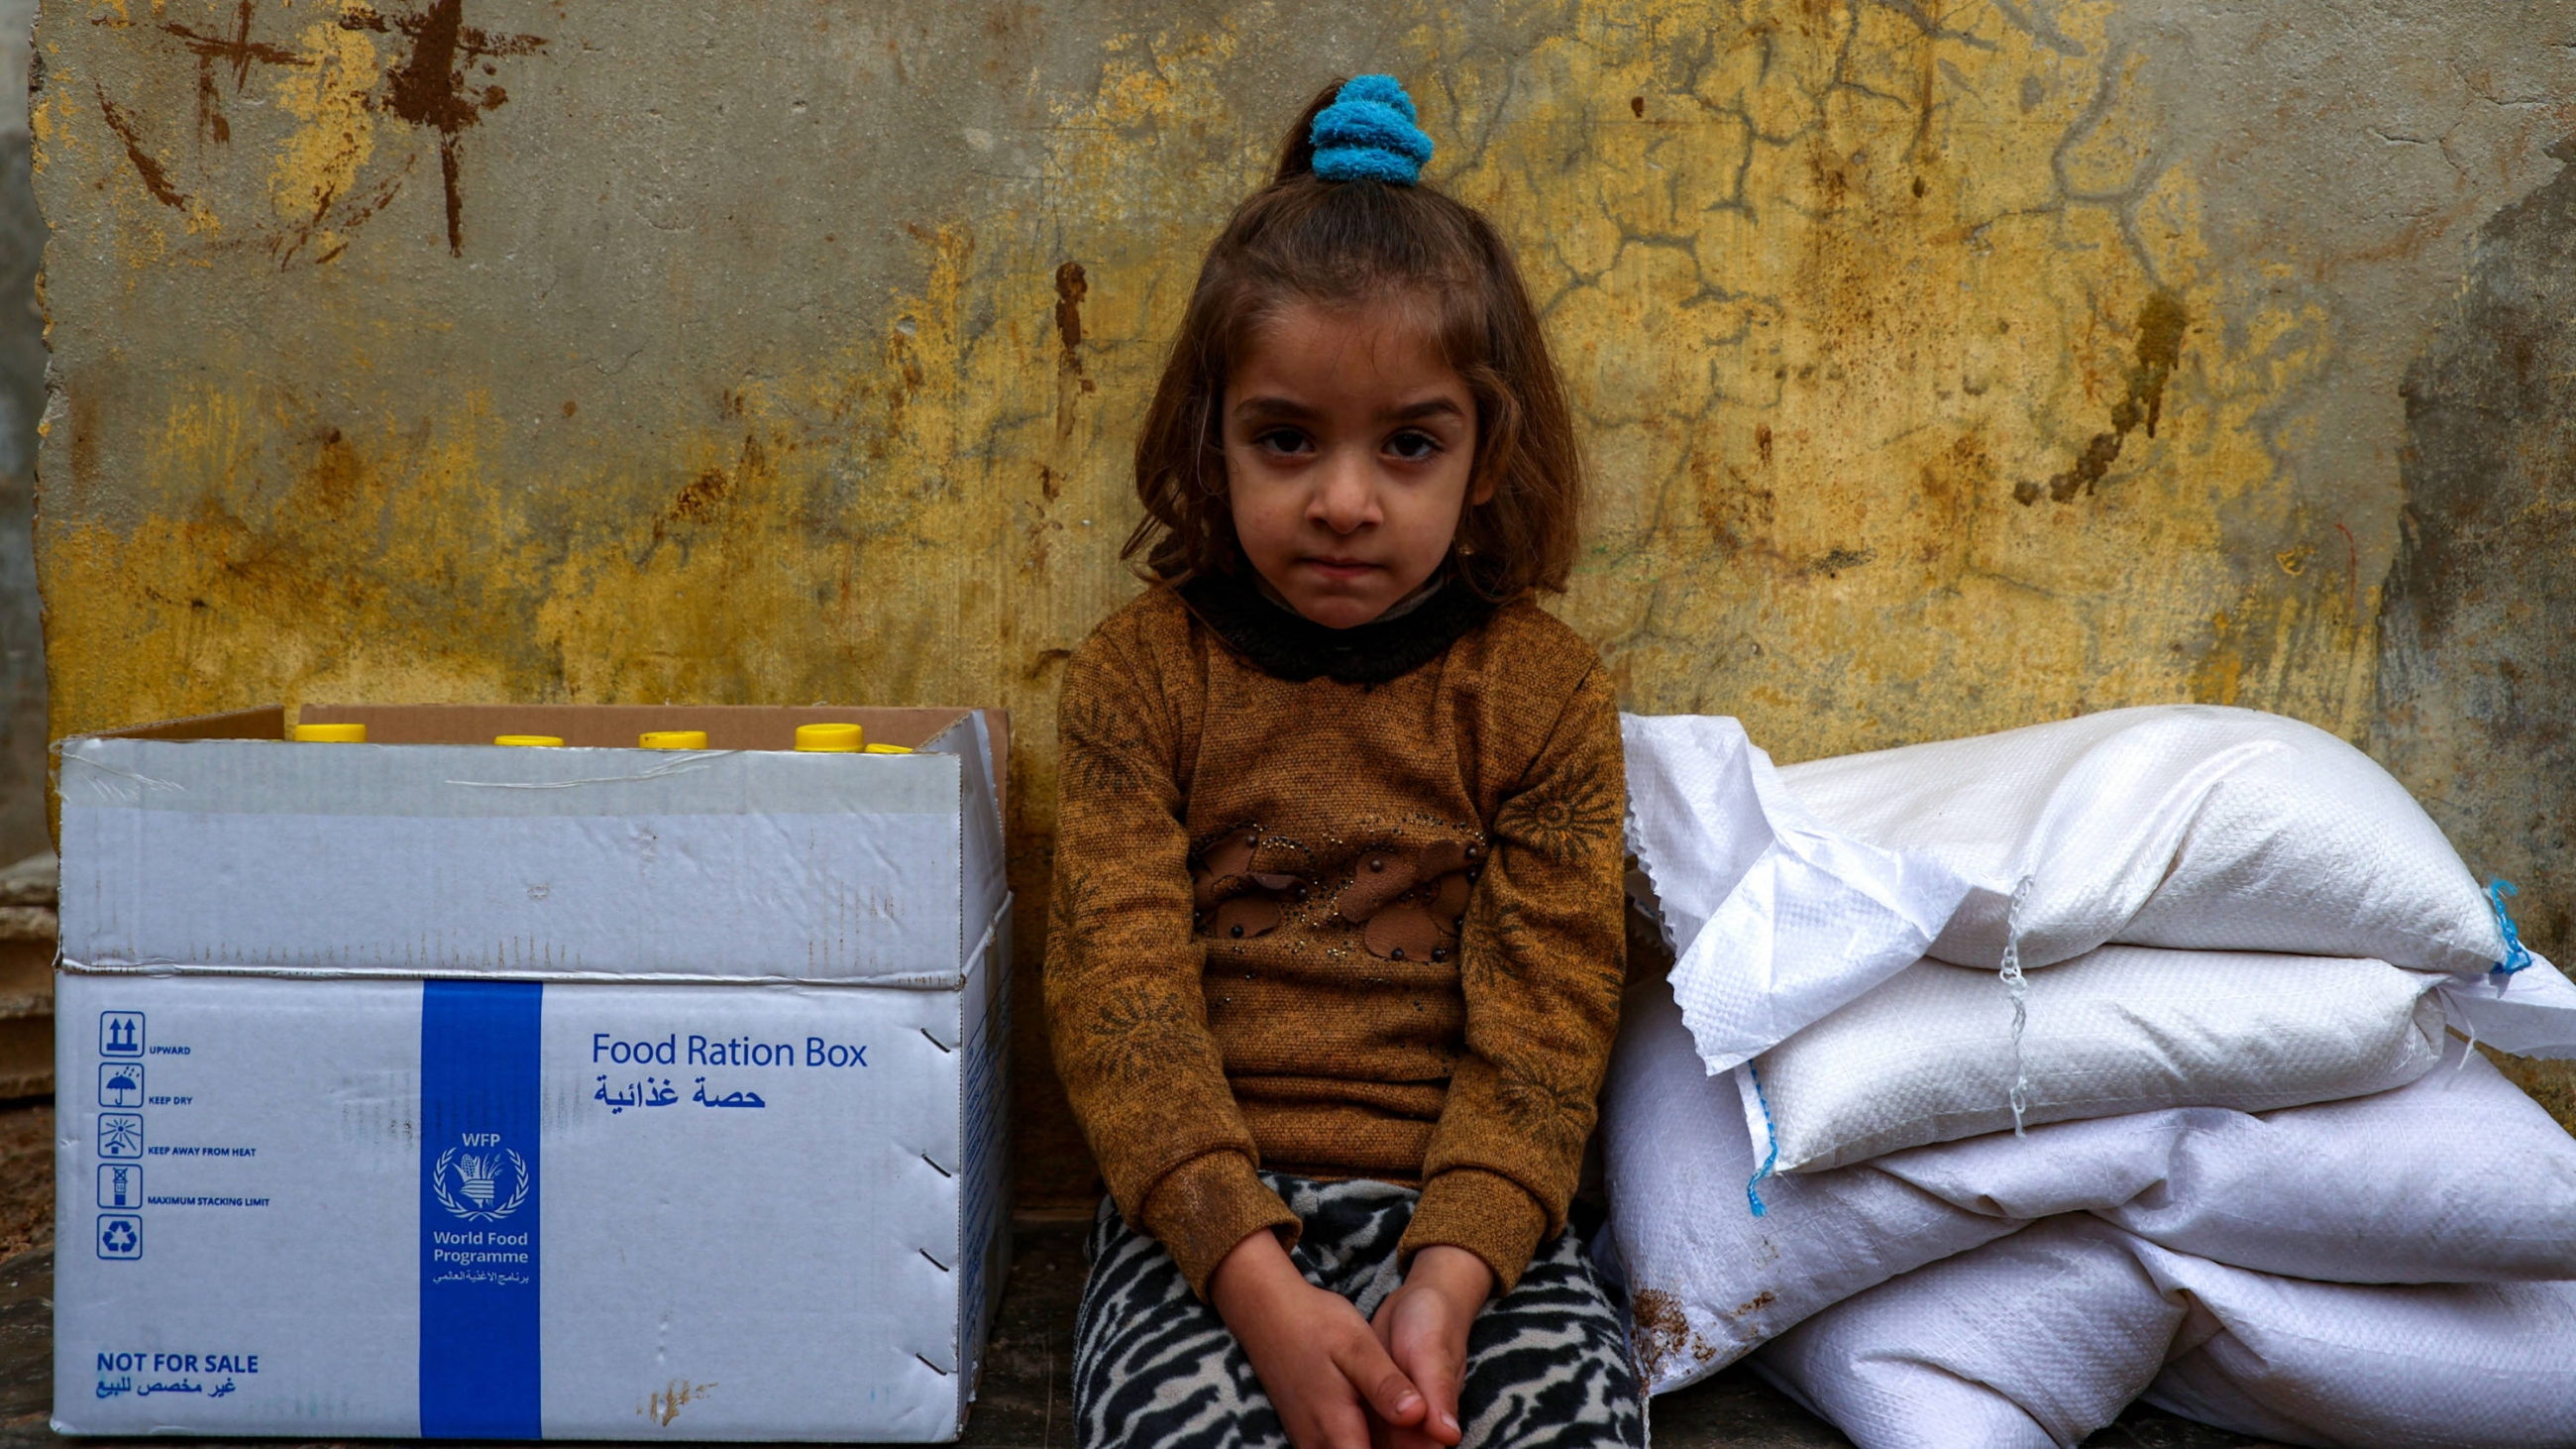 A displaced Syrian girl sits amid relief packages from the United Nations' World Food Program (WFP) before the cessation of aid delivery, in the camp of Atme, on the outskirts of Idlib, northwestern Syria, on 6 December 2023 (AFP)